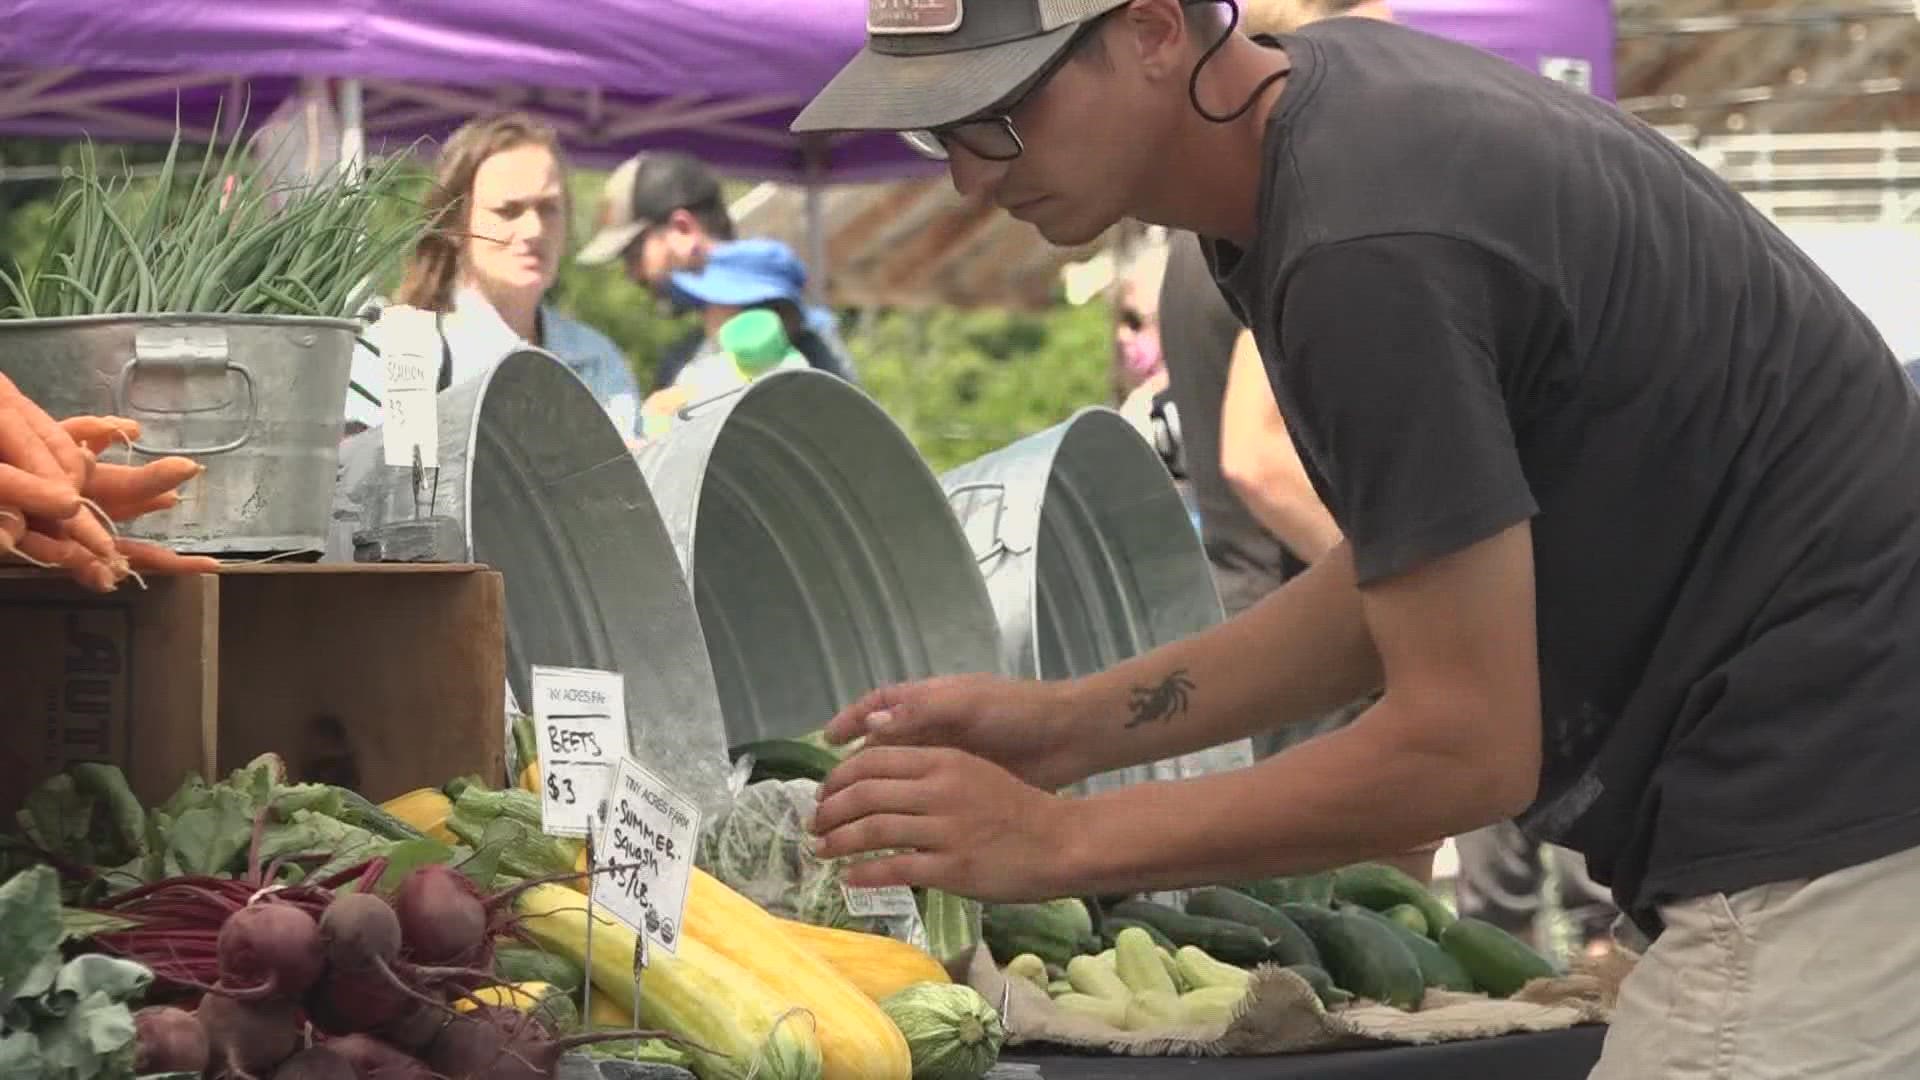 The Maine Farmers Market Price Report samples product prices at farmer's markets across the state, helping farmers figure out the best financial path to take.